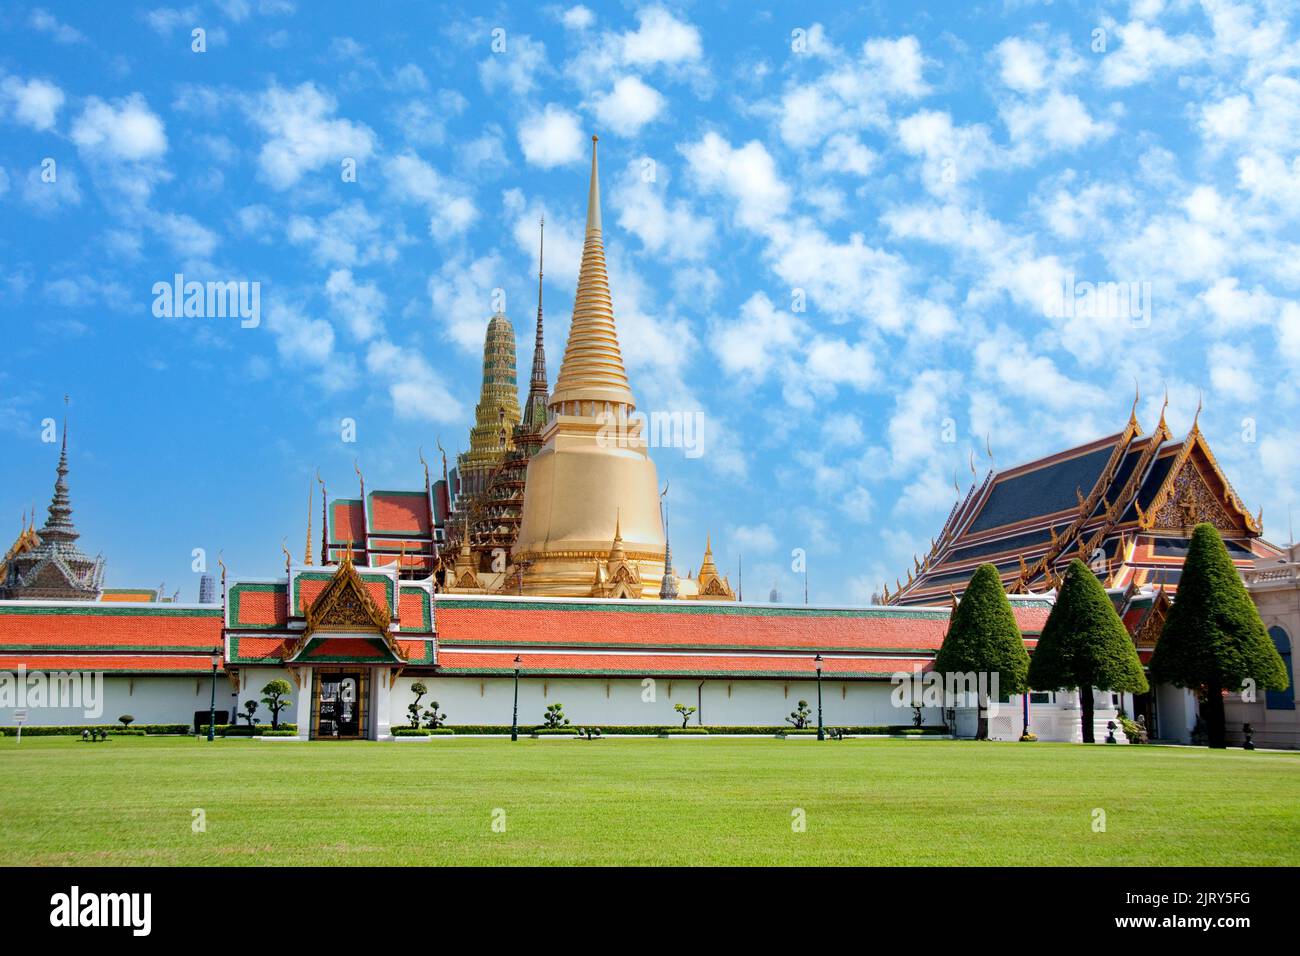 View of the Grand Palace in Bangkok, Thailand Stock Photo